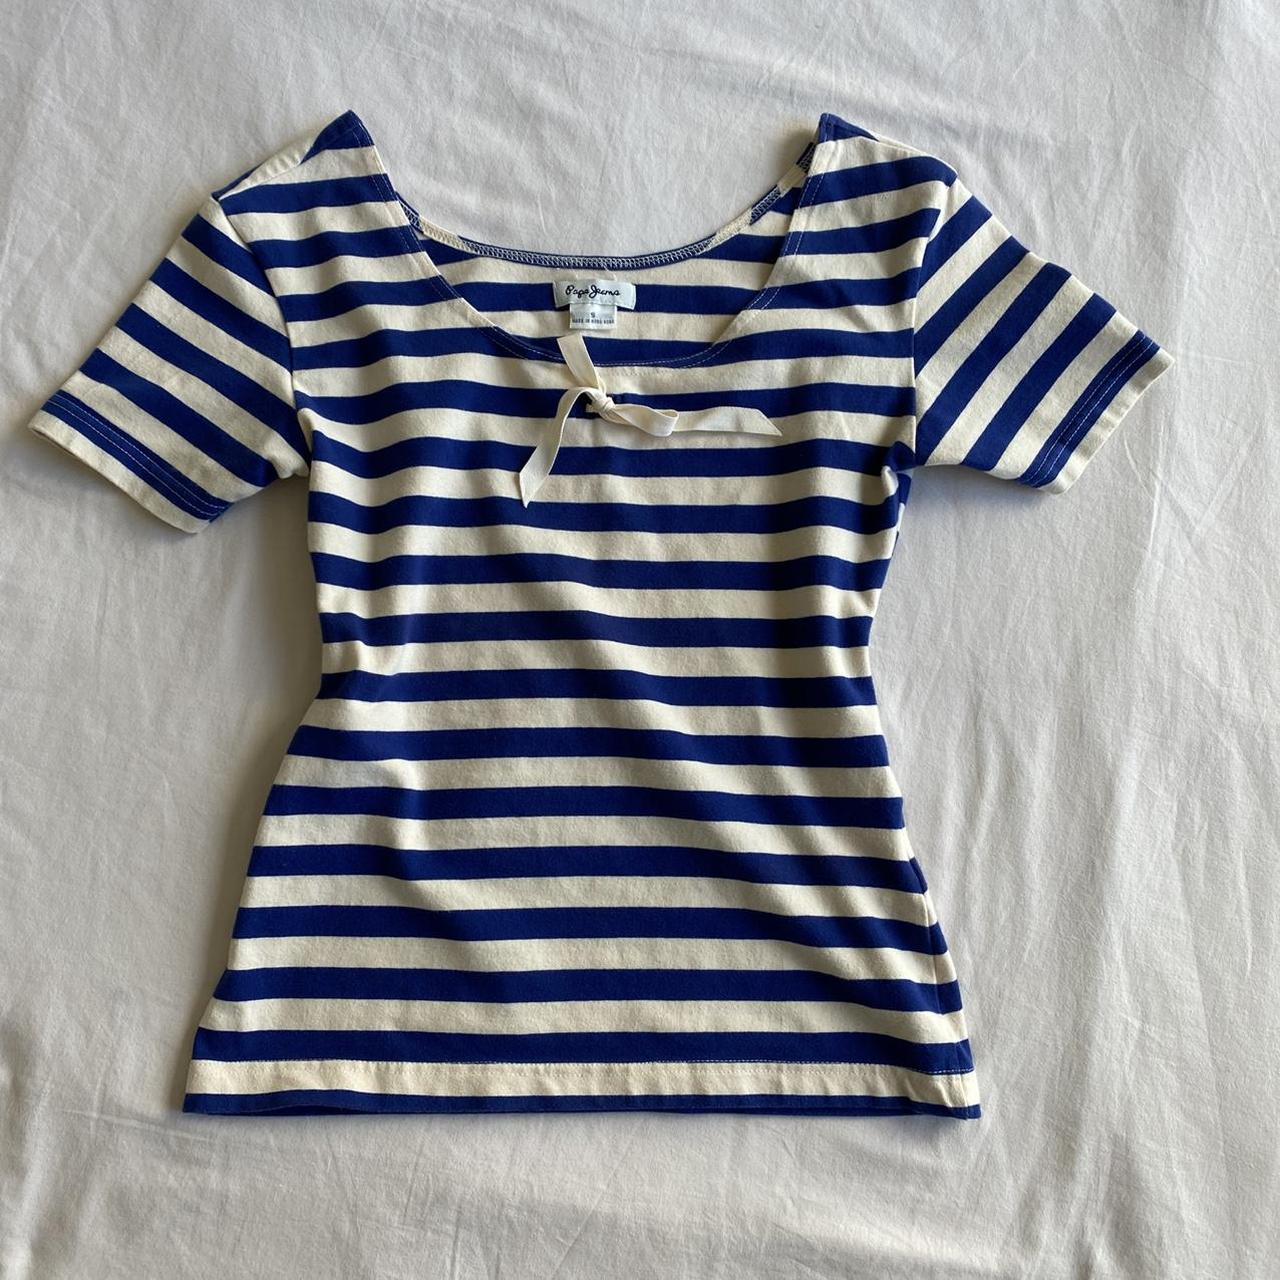 Pepe Jeans Women's Blue and White Shirt (4)